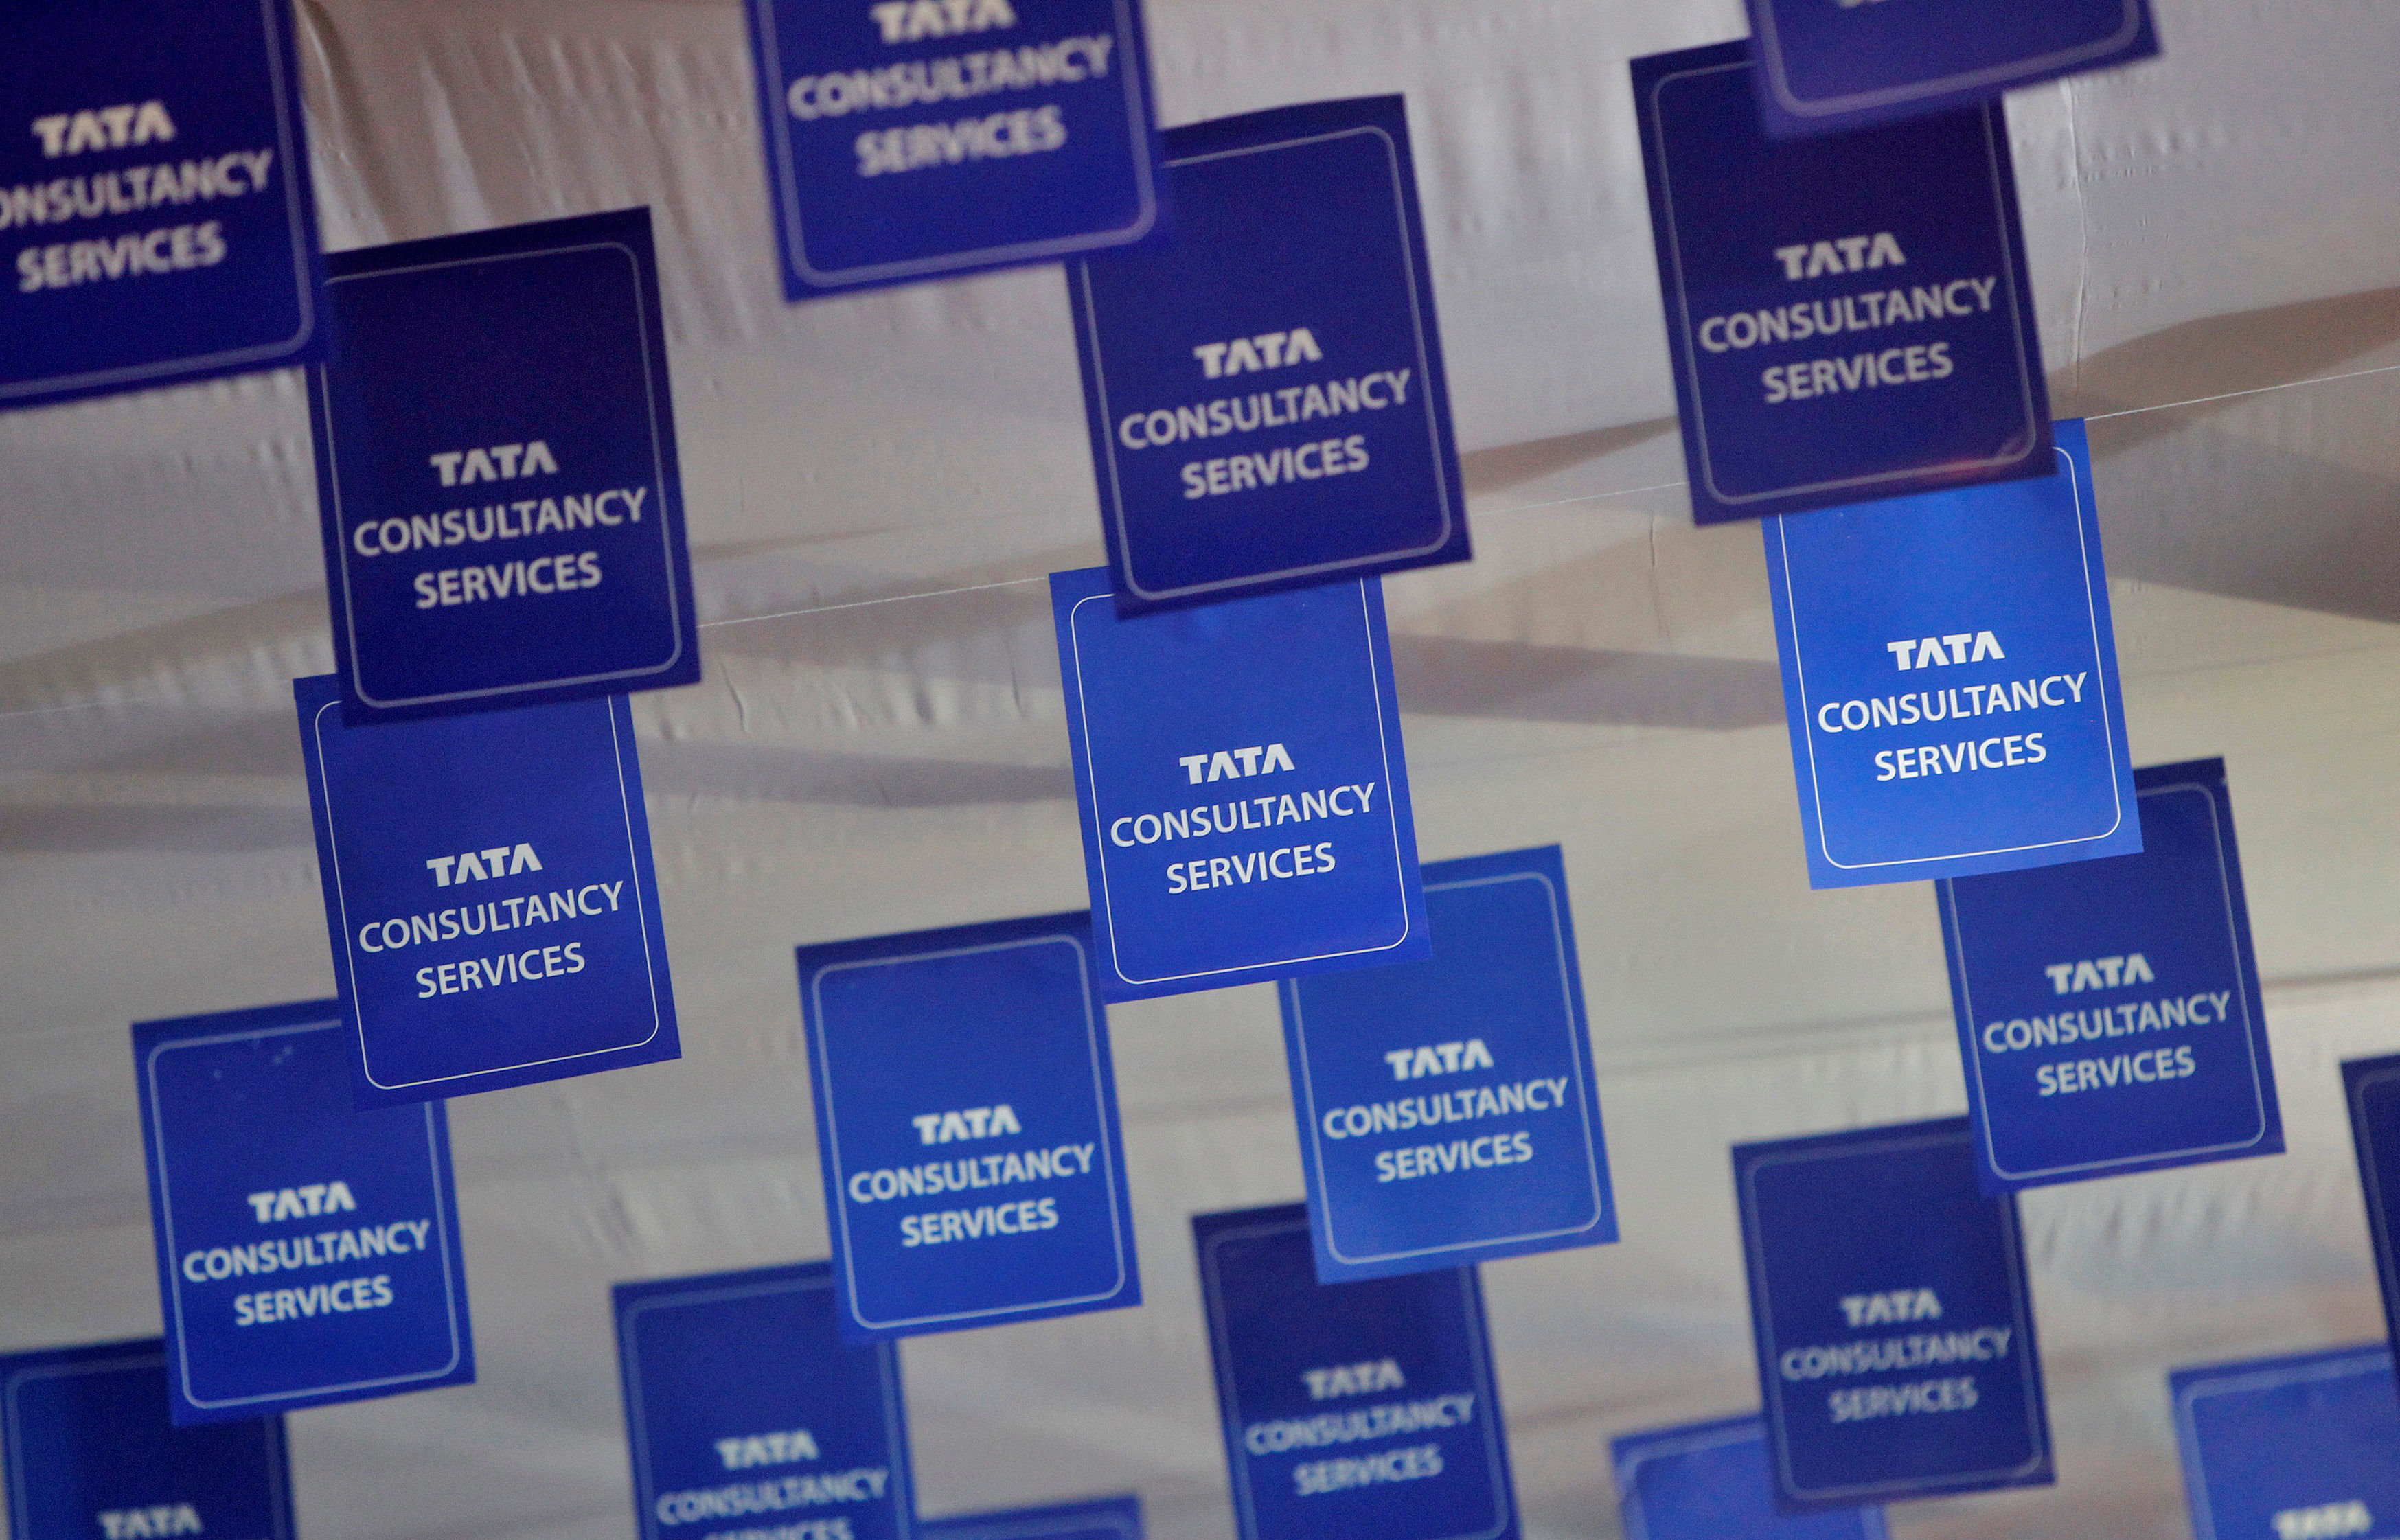 This is the second initiative by TCS iON during the time of the COVID-19 pandemic. (Credit: Reuters Photo)